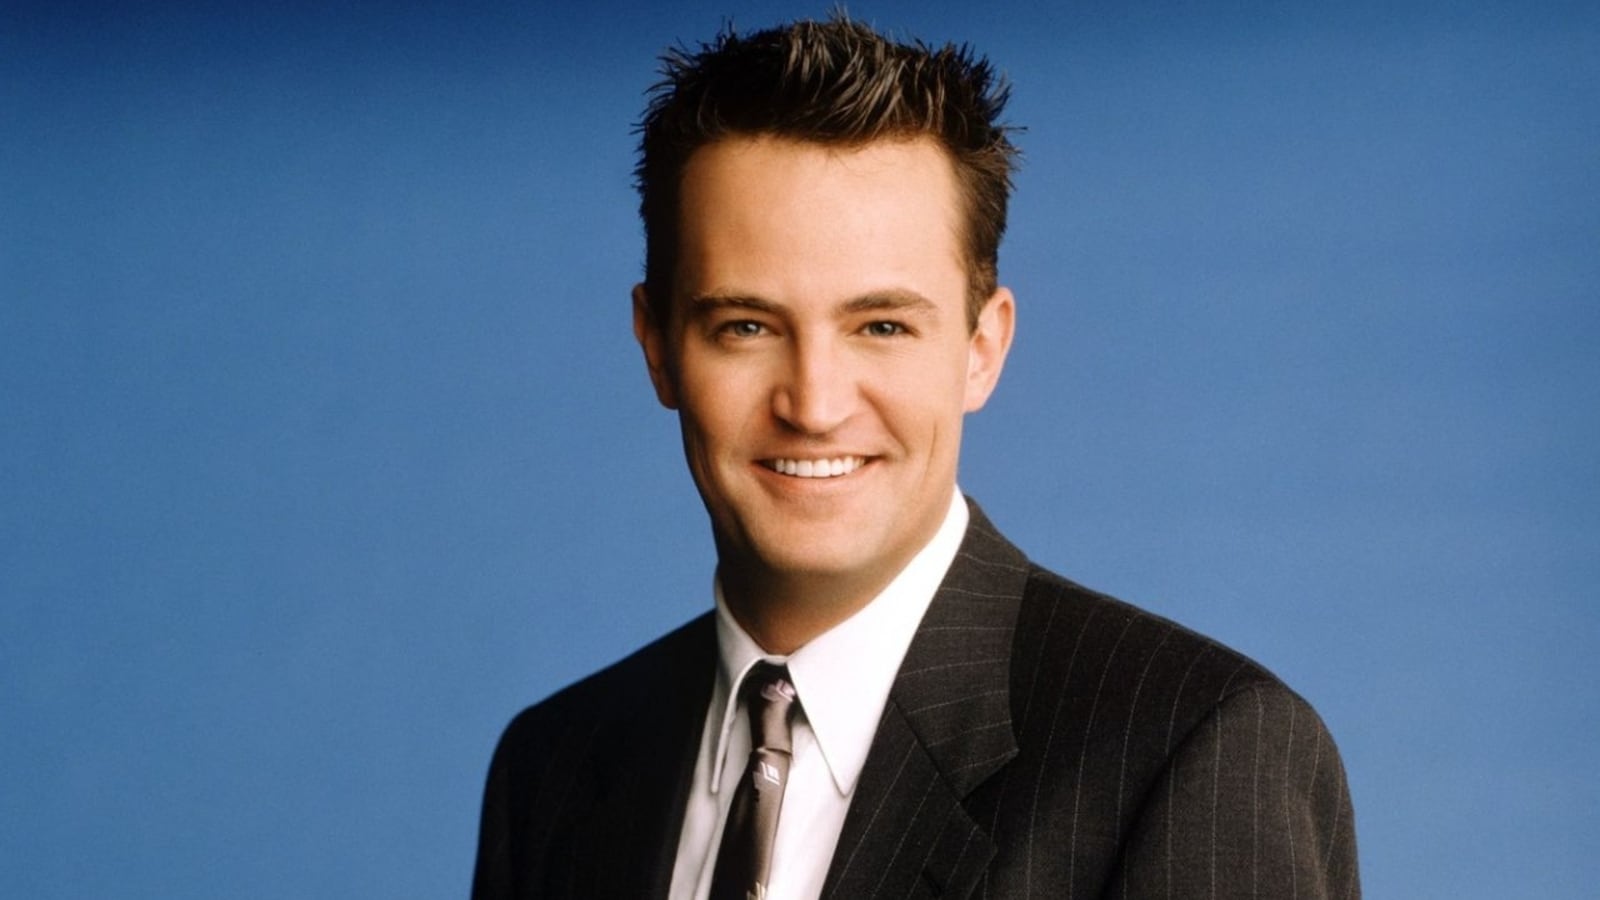 I'm literally in tears: Social media was revolutionized by the creation of Chandler Bing's AI chatbot as a tribute to Matthew Perry.